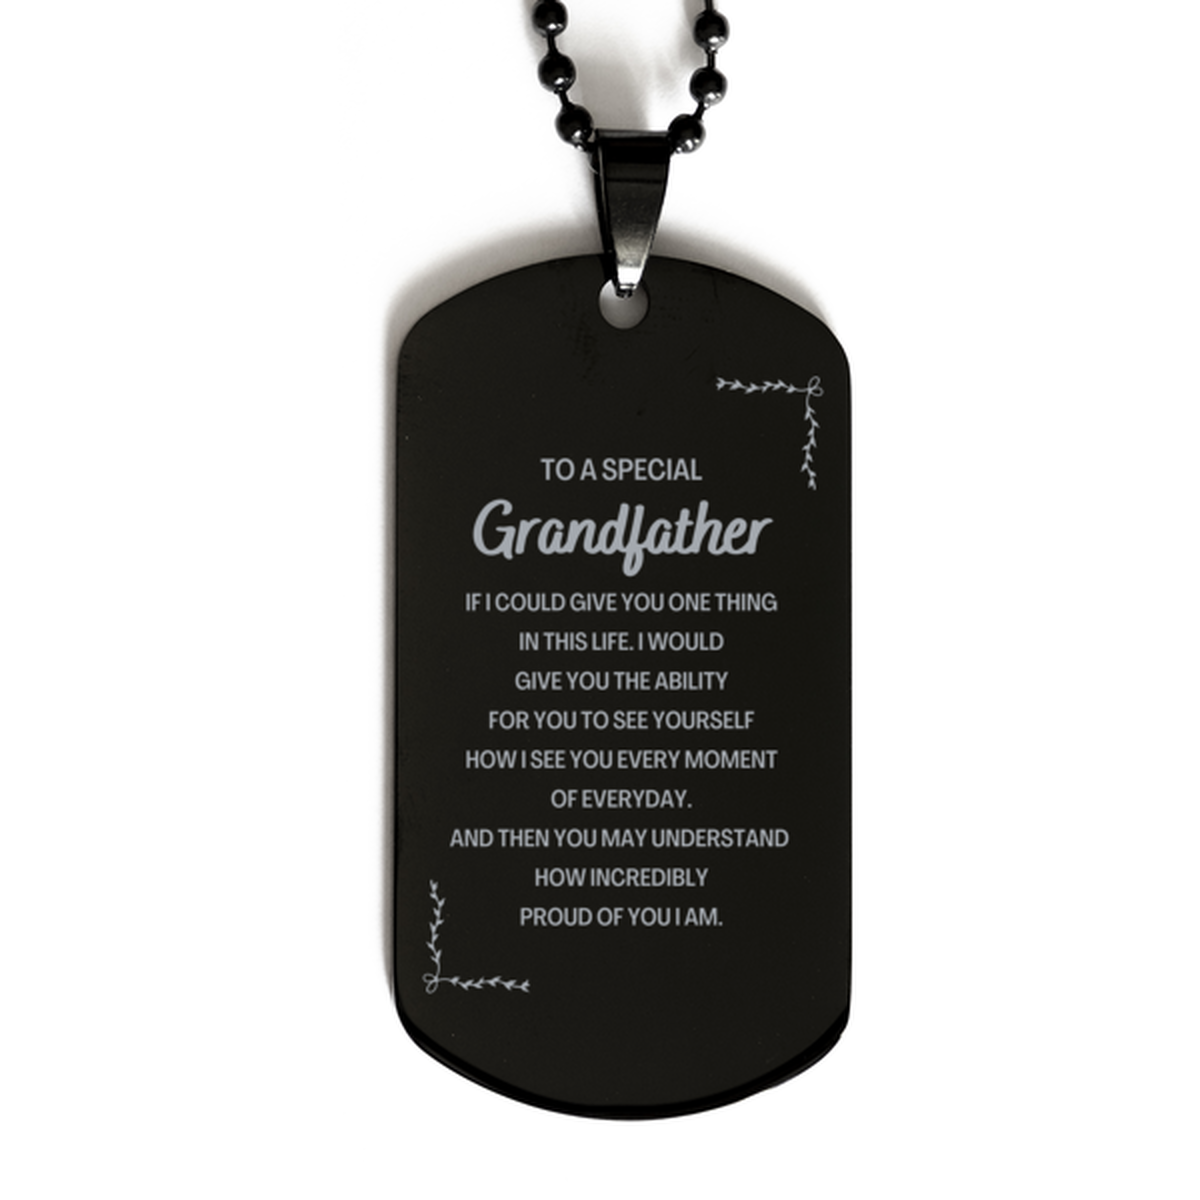 To My Grandfather Black Dog Tag, Gifts For Grandfather Engraved, Inspirational Gifts for Christmas Birthday, Epic Gifts for Grandfather To A Special Grandfather how incredibly proud of you I am